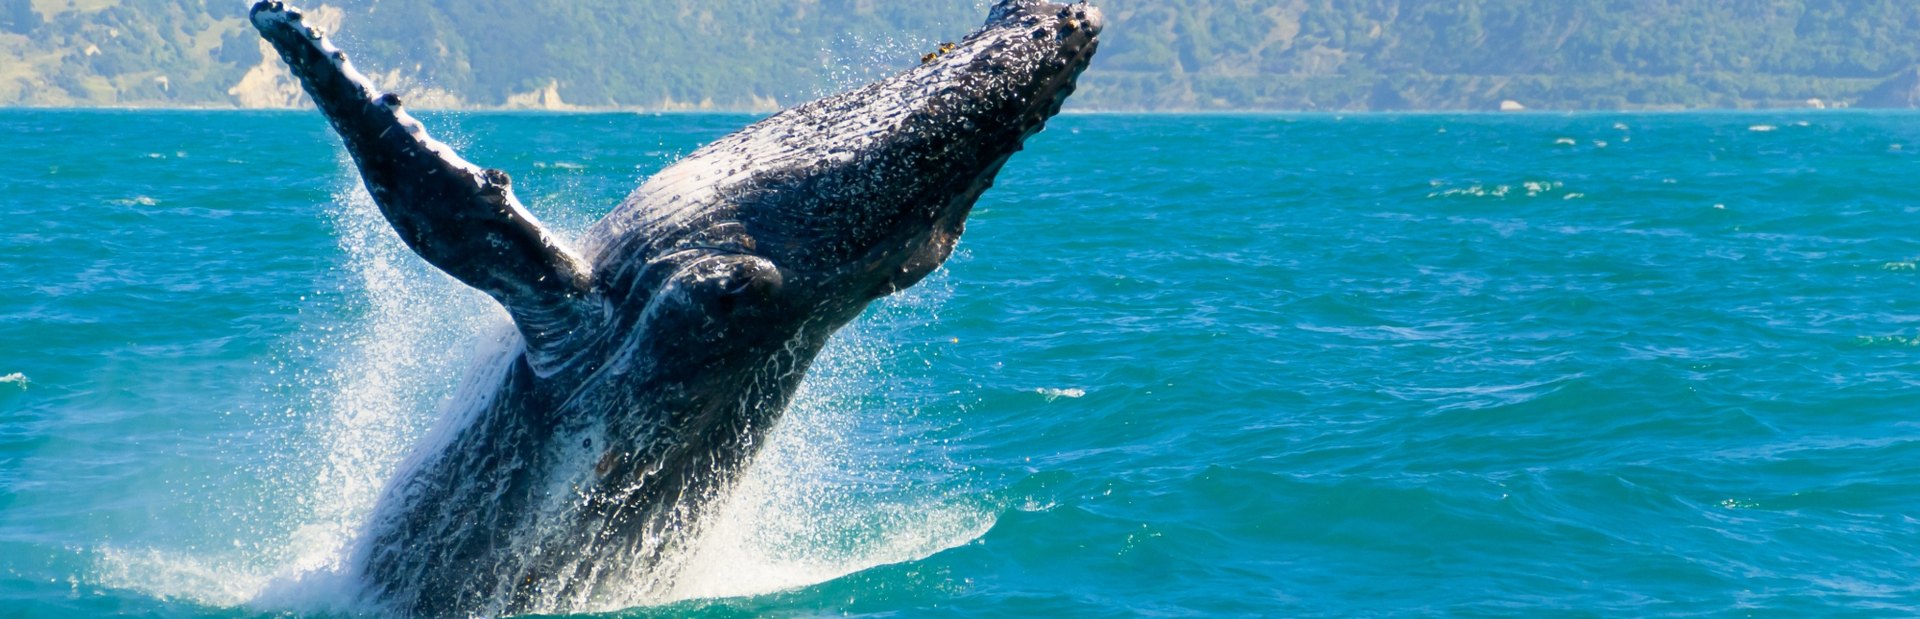 Where to Whale Watch in New Zealand